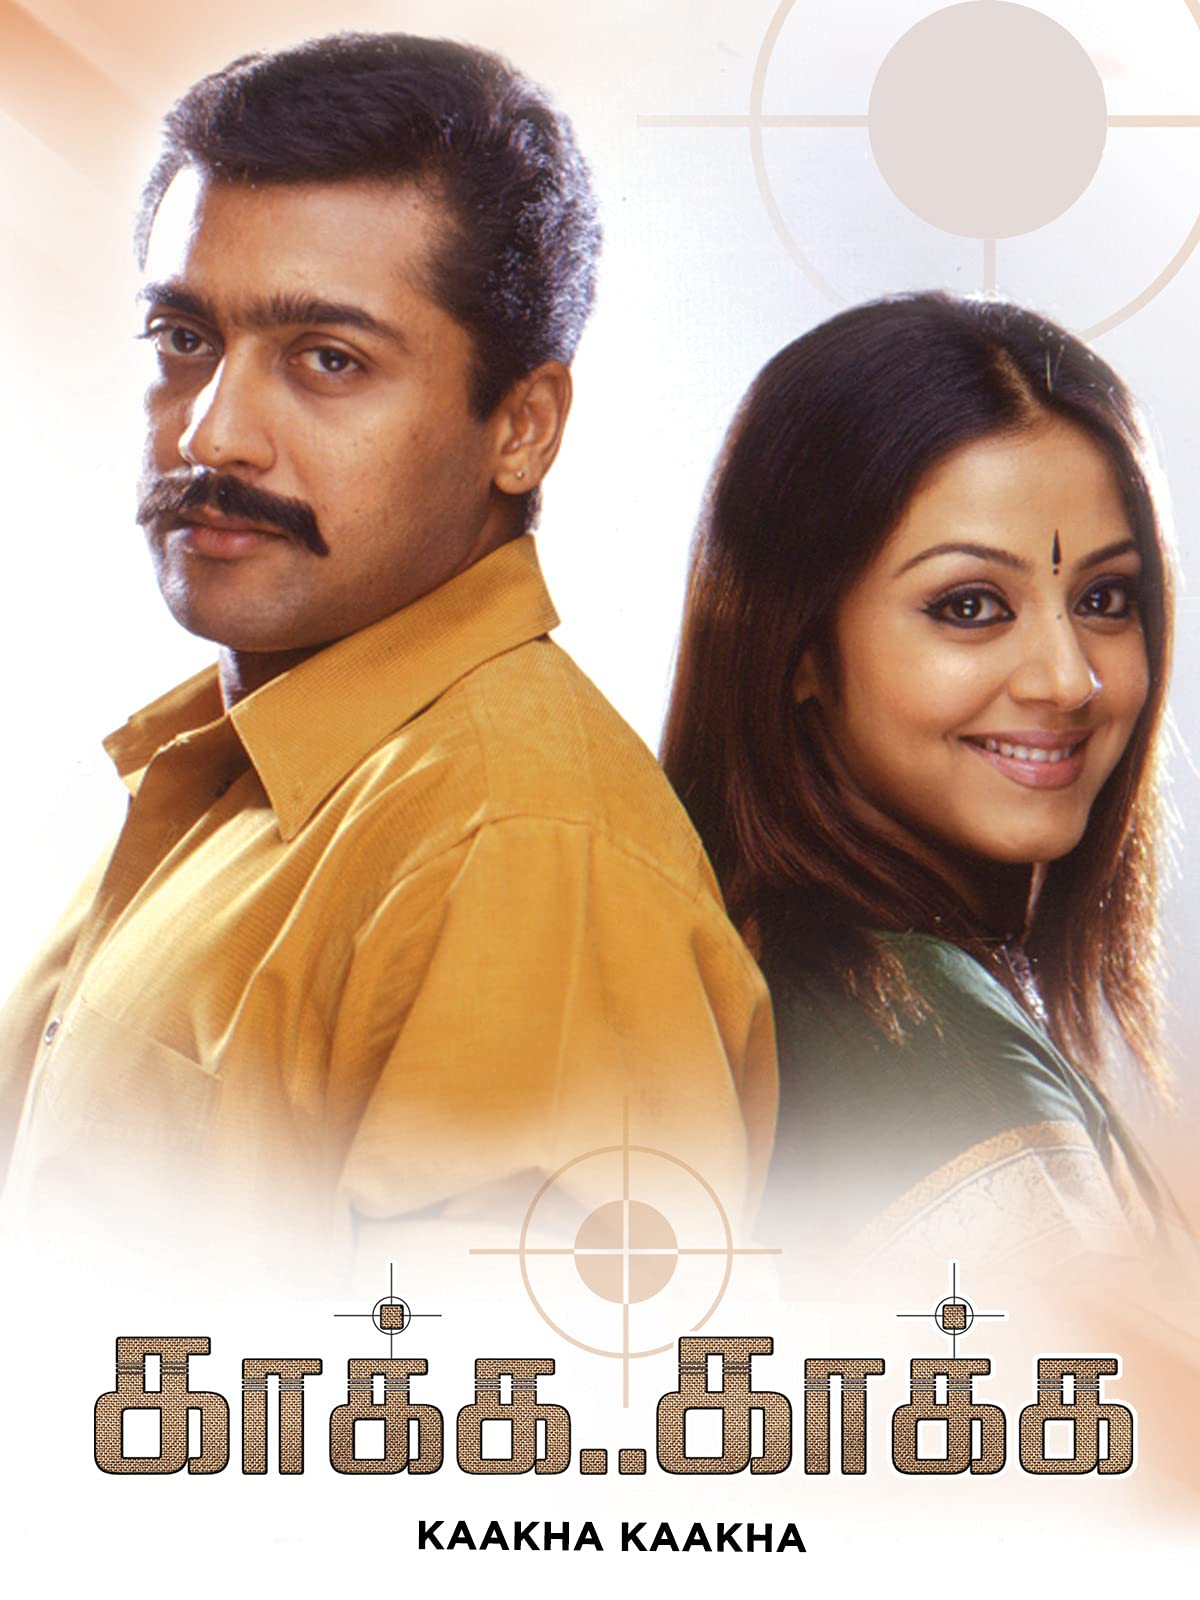 Surya acted in movie which was rejected by vijay ajith vikram